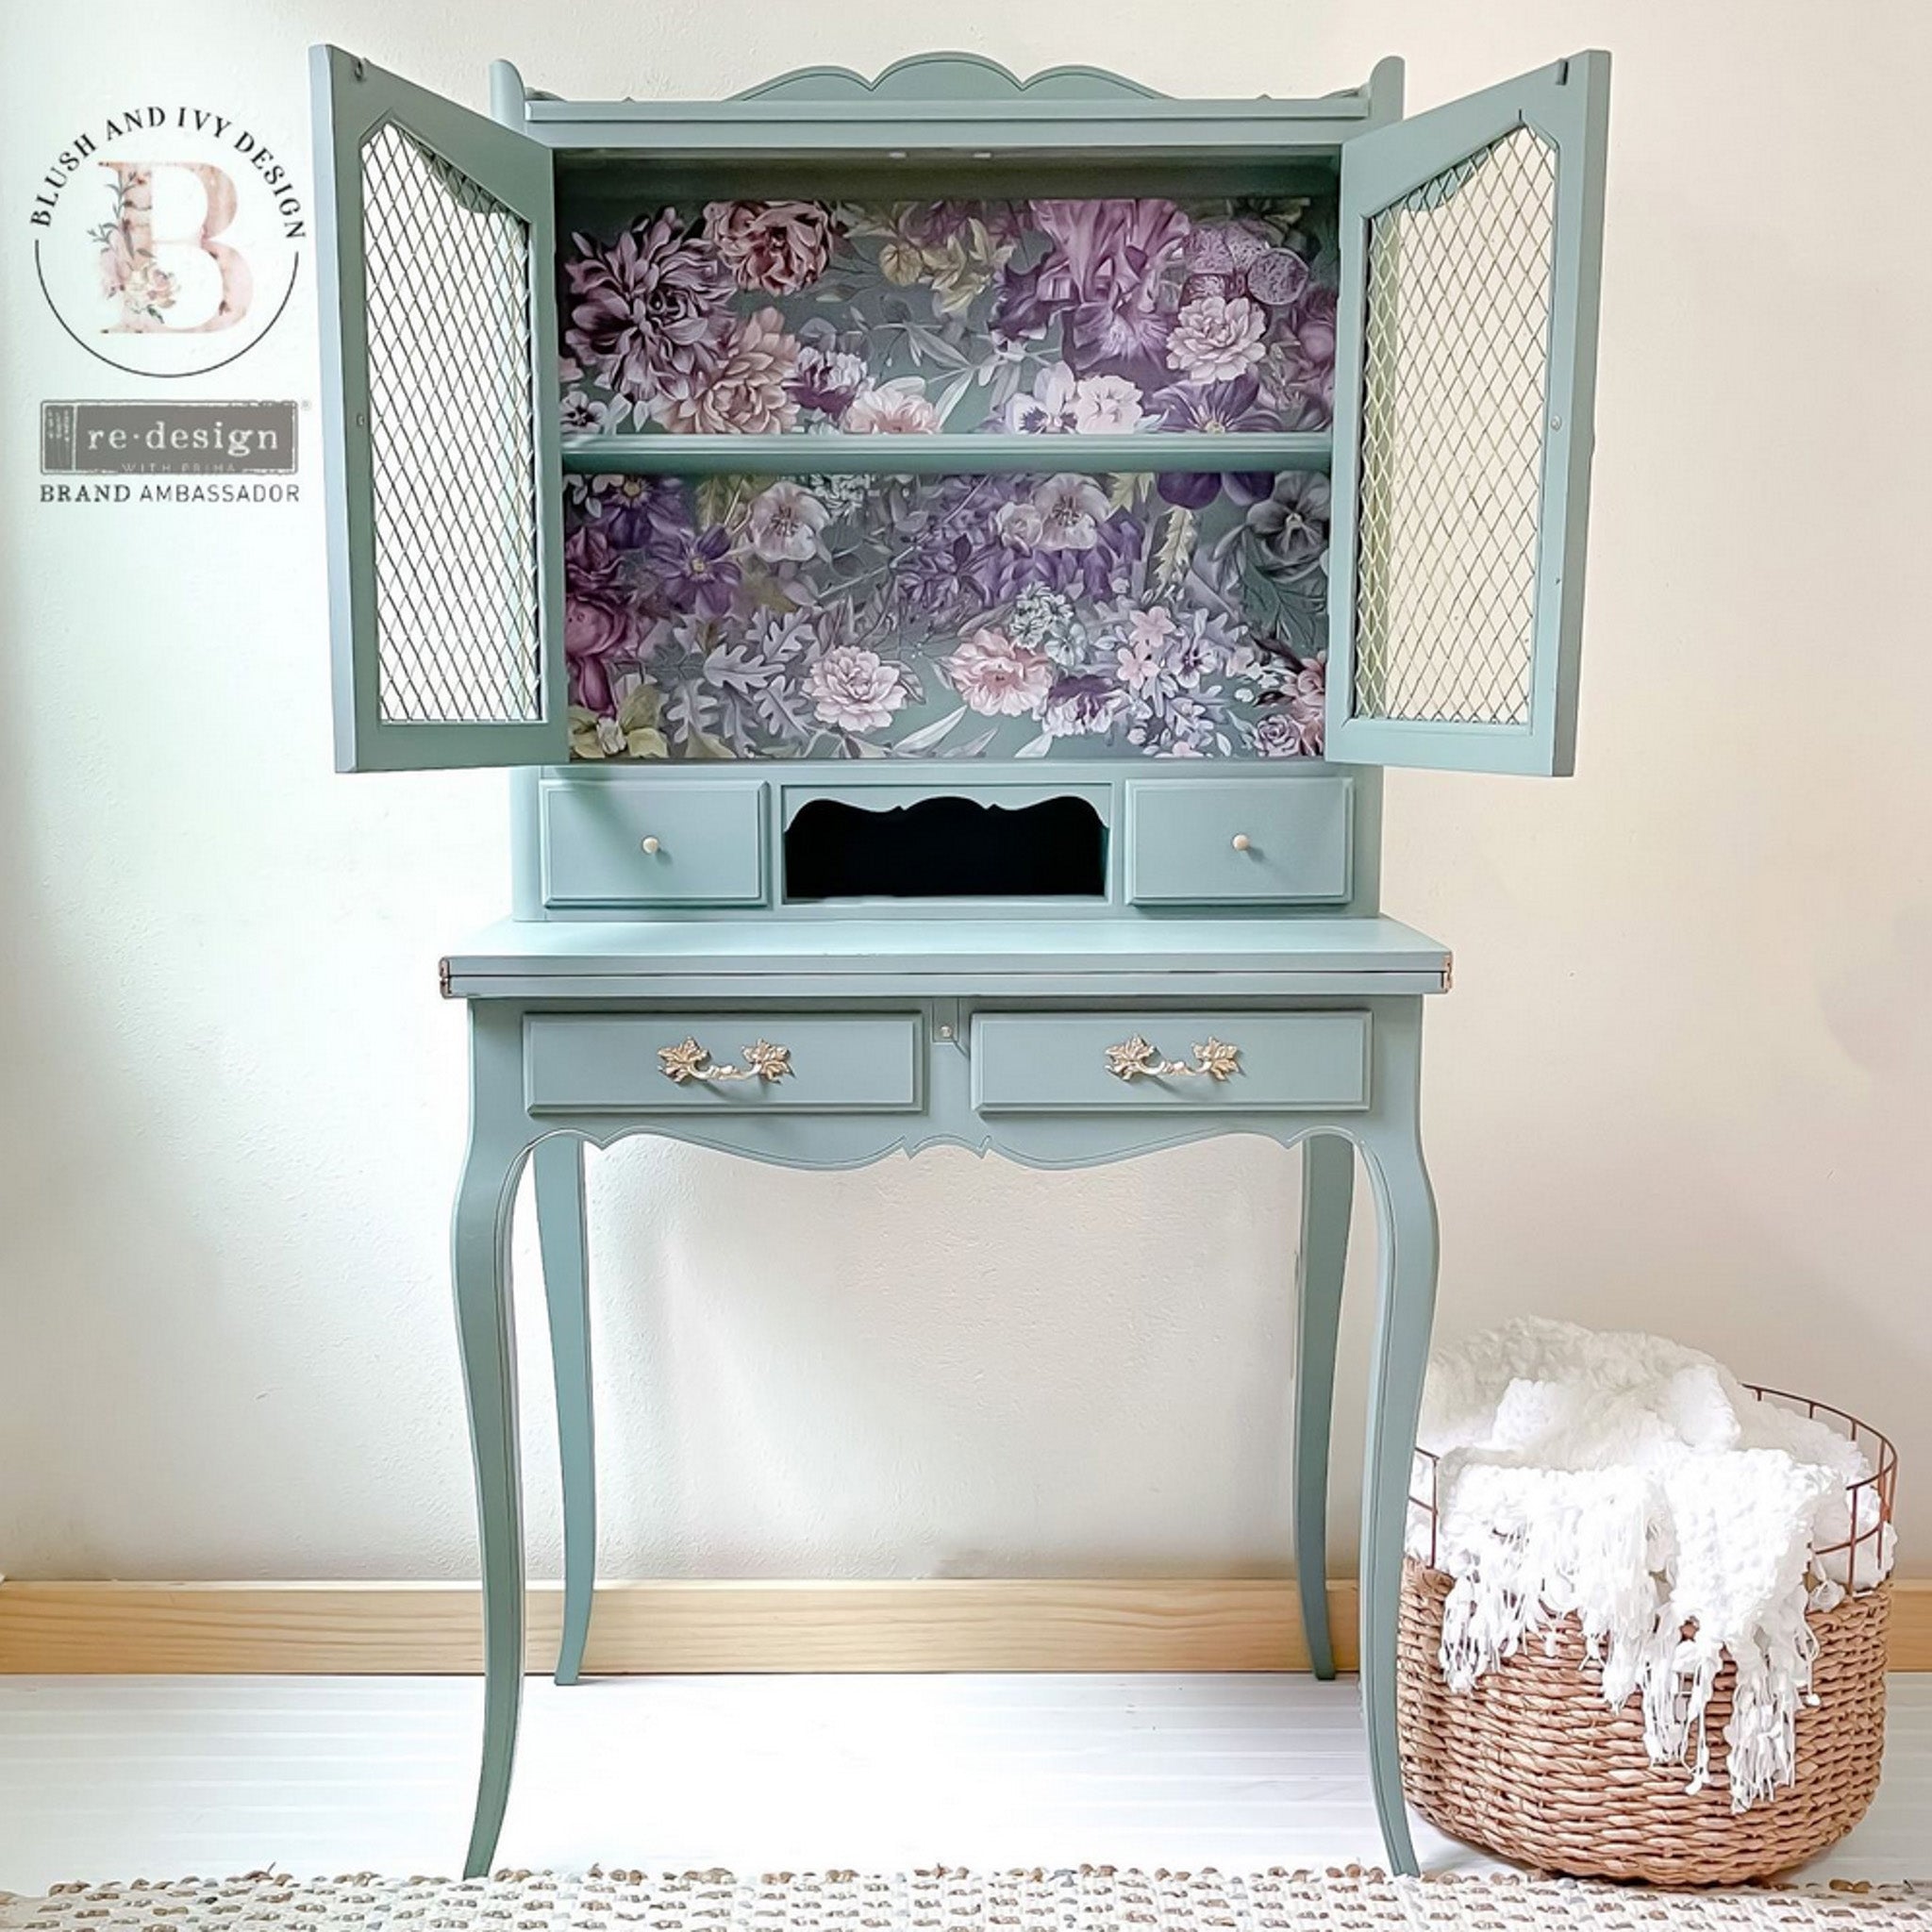 A vintage desk with a small hutch top refurbished by Blush and Ivy Design is painted pale blue and features ReDesign with Prima's Vigorous Violet transfer against the hutch backboard.